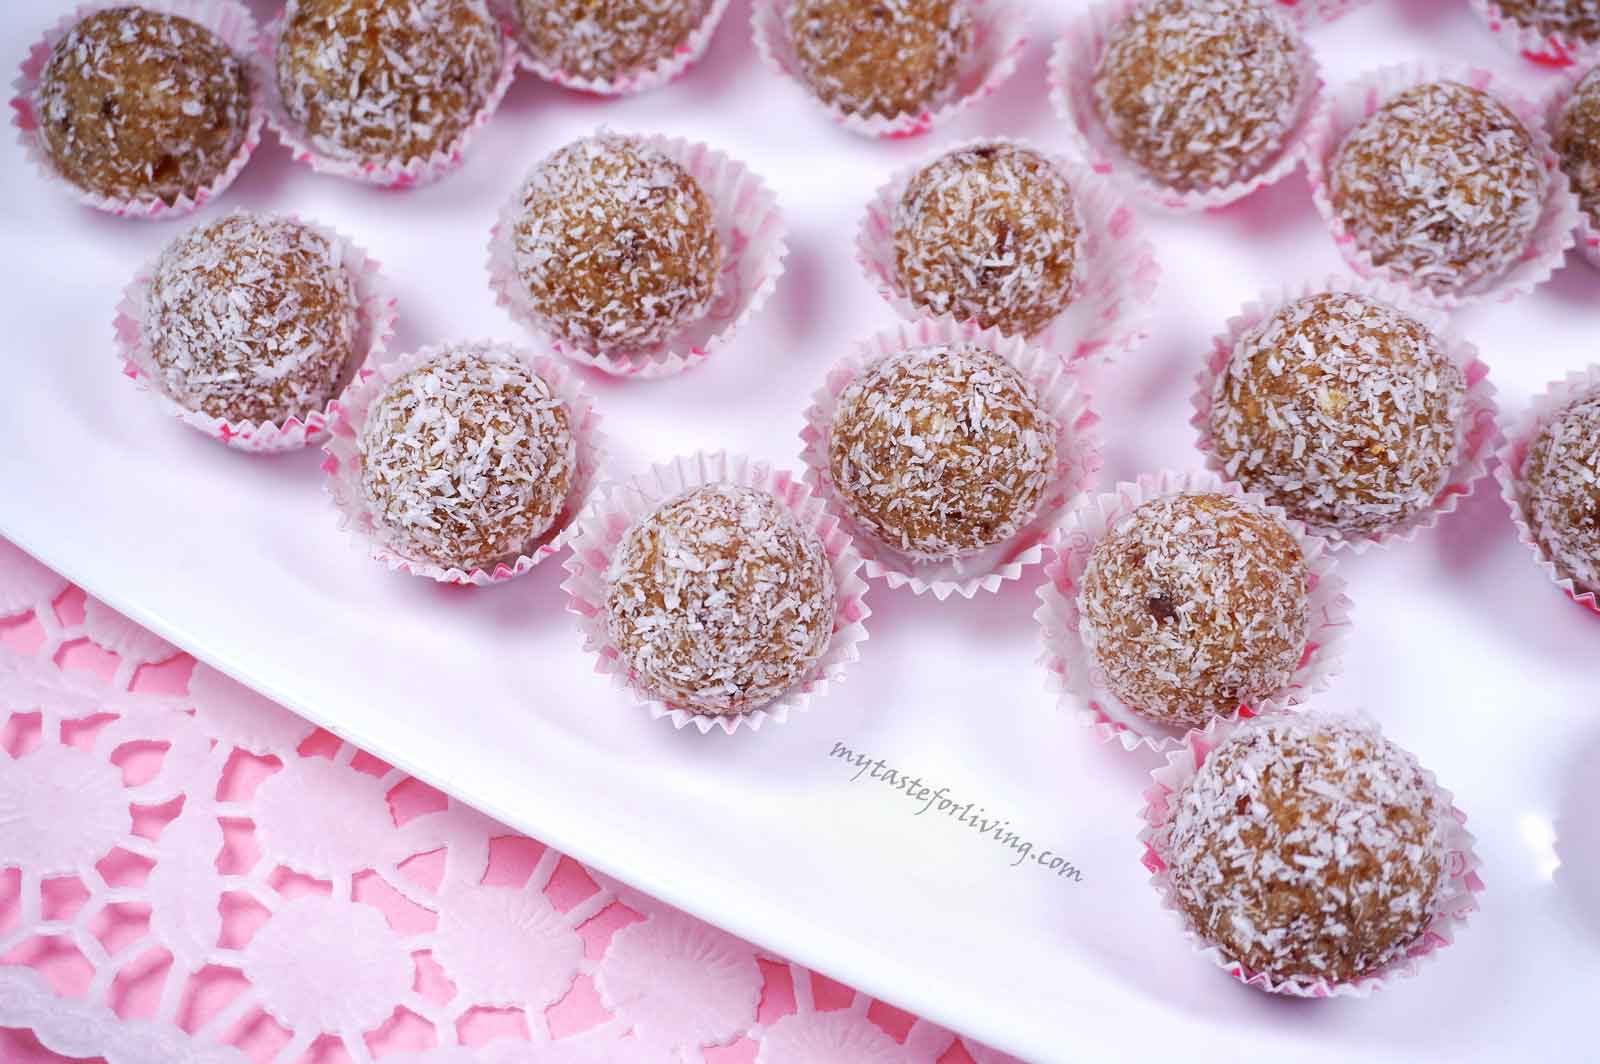 Energy vegan raw bites made by cashews, coconut shavings, dates and cinnamon. These healthy bites are extremely easy and quick to prepare and are the perfect snack in our busy daily lives.